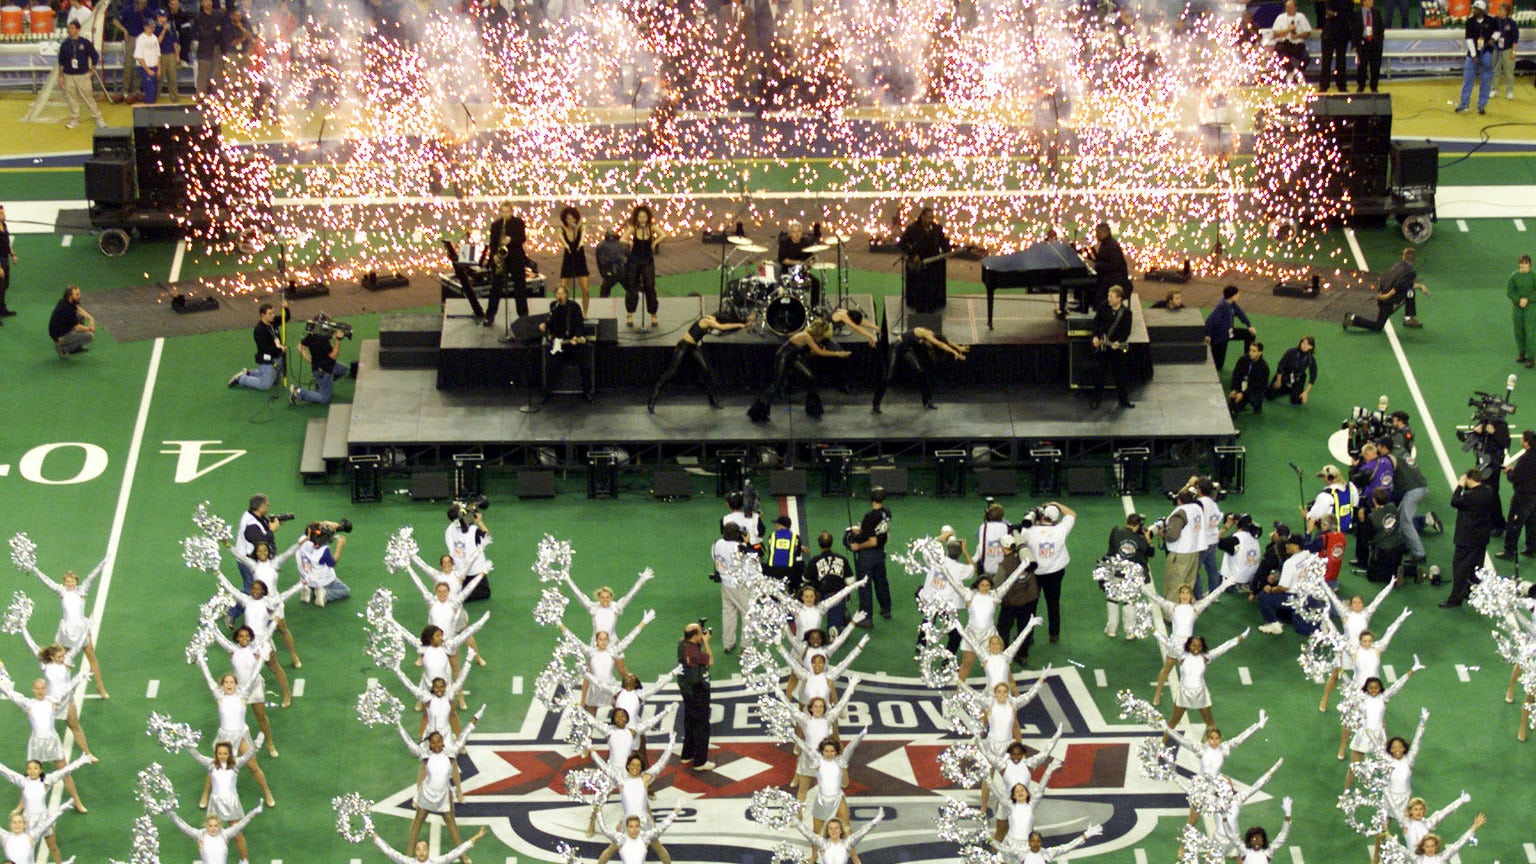 Live sports is 'key to streaming' amid Apple's sponsorship of Super Bowl  Halftime show: Analyst 